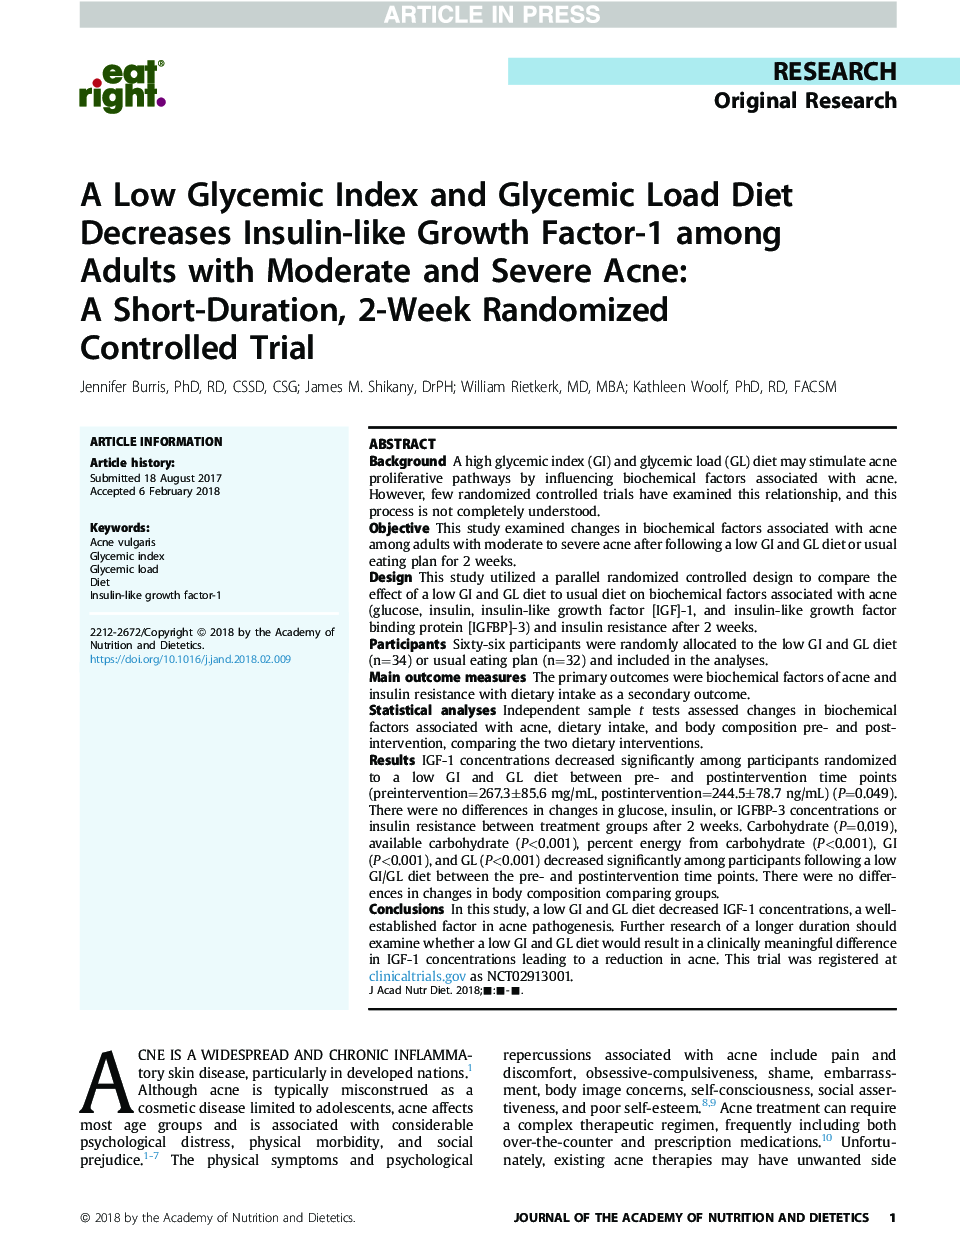 A Low Glycemic Index and Glycemic Load Diet Decreases Insulin-like Growth Factor-1 among Adults with Moderate and Severe Acne: AÂ Short-Duration, 2-Week Randomized Controlled Trial